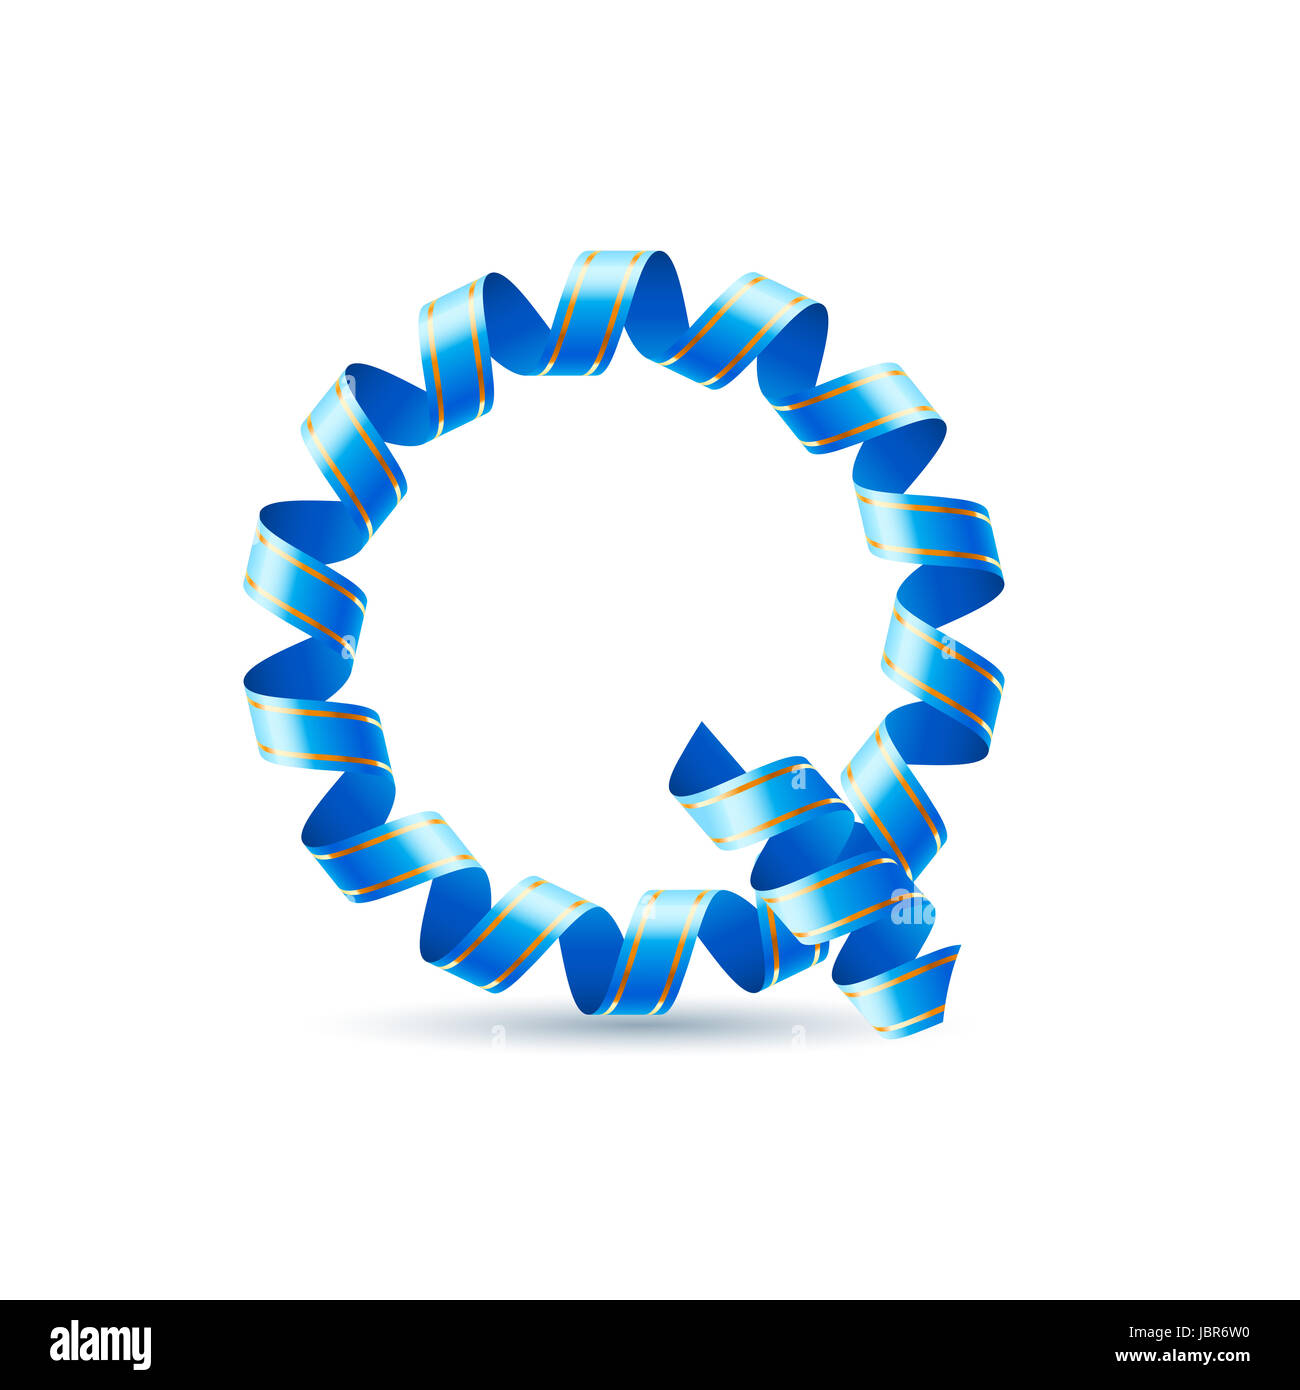 Letter Q made of blue curled shint ribbon Stock Photo